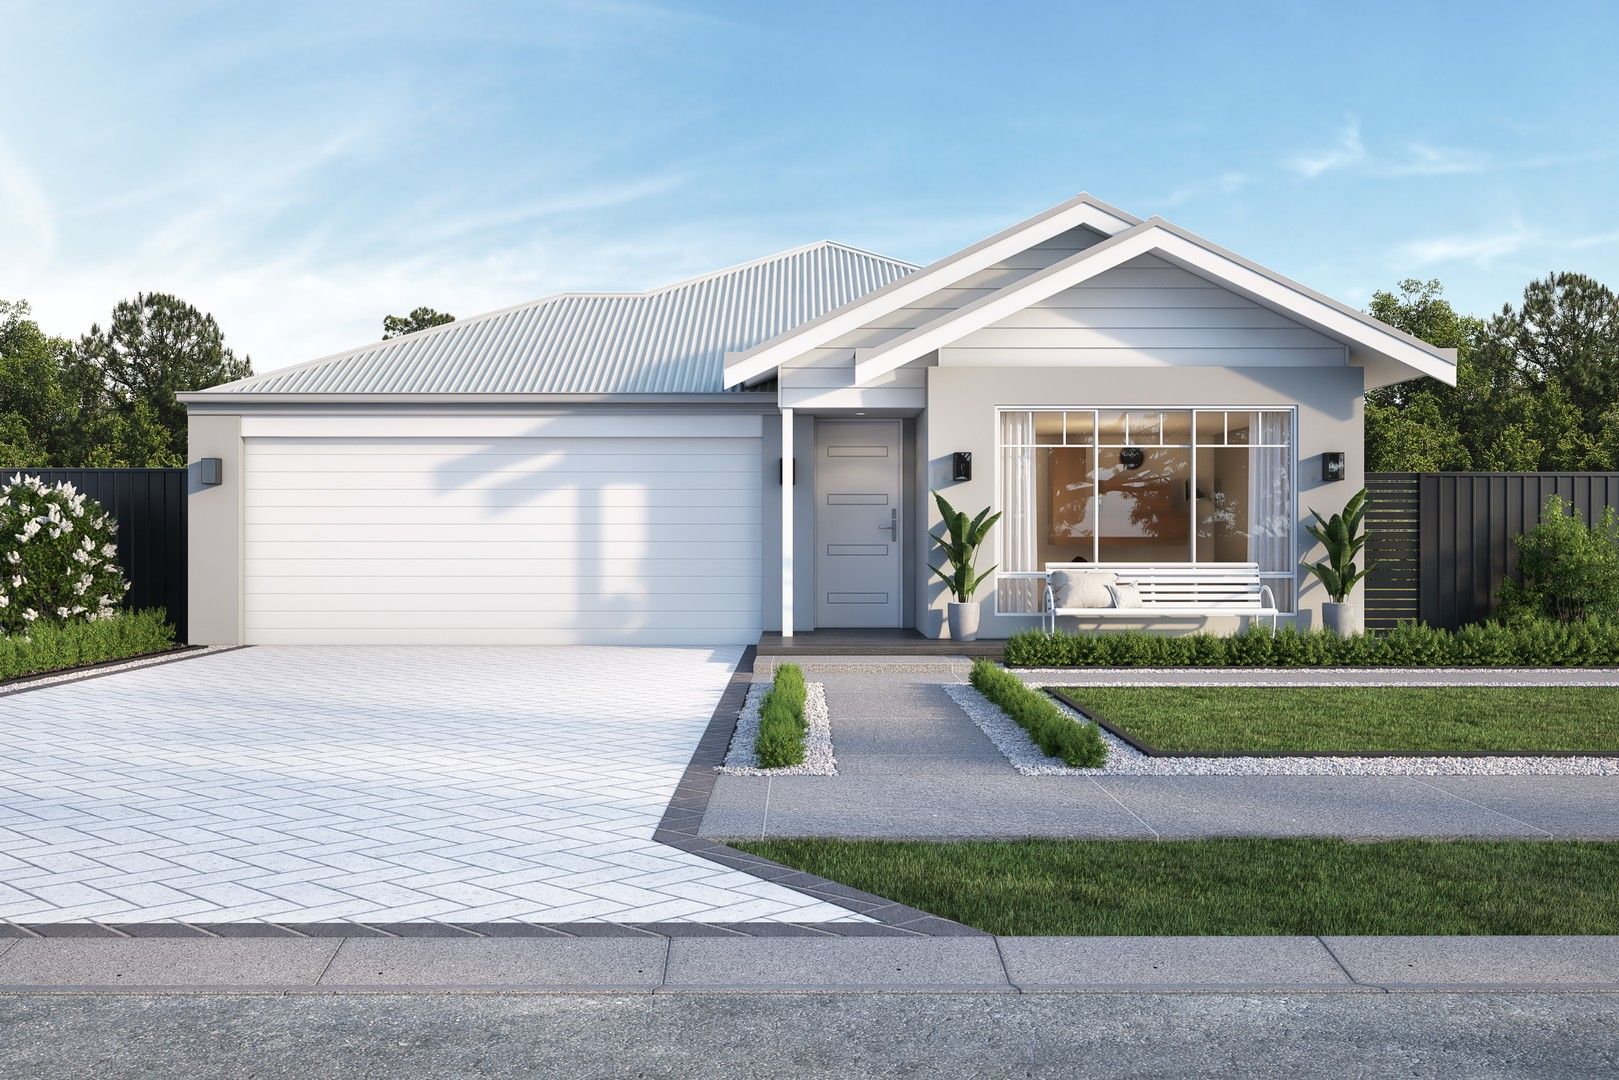 4 bedrooms New House & Land in  MORLEY WA, 6062